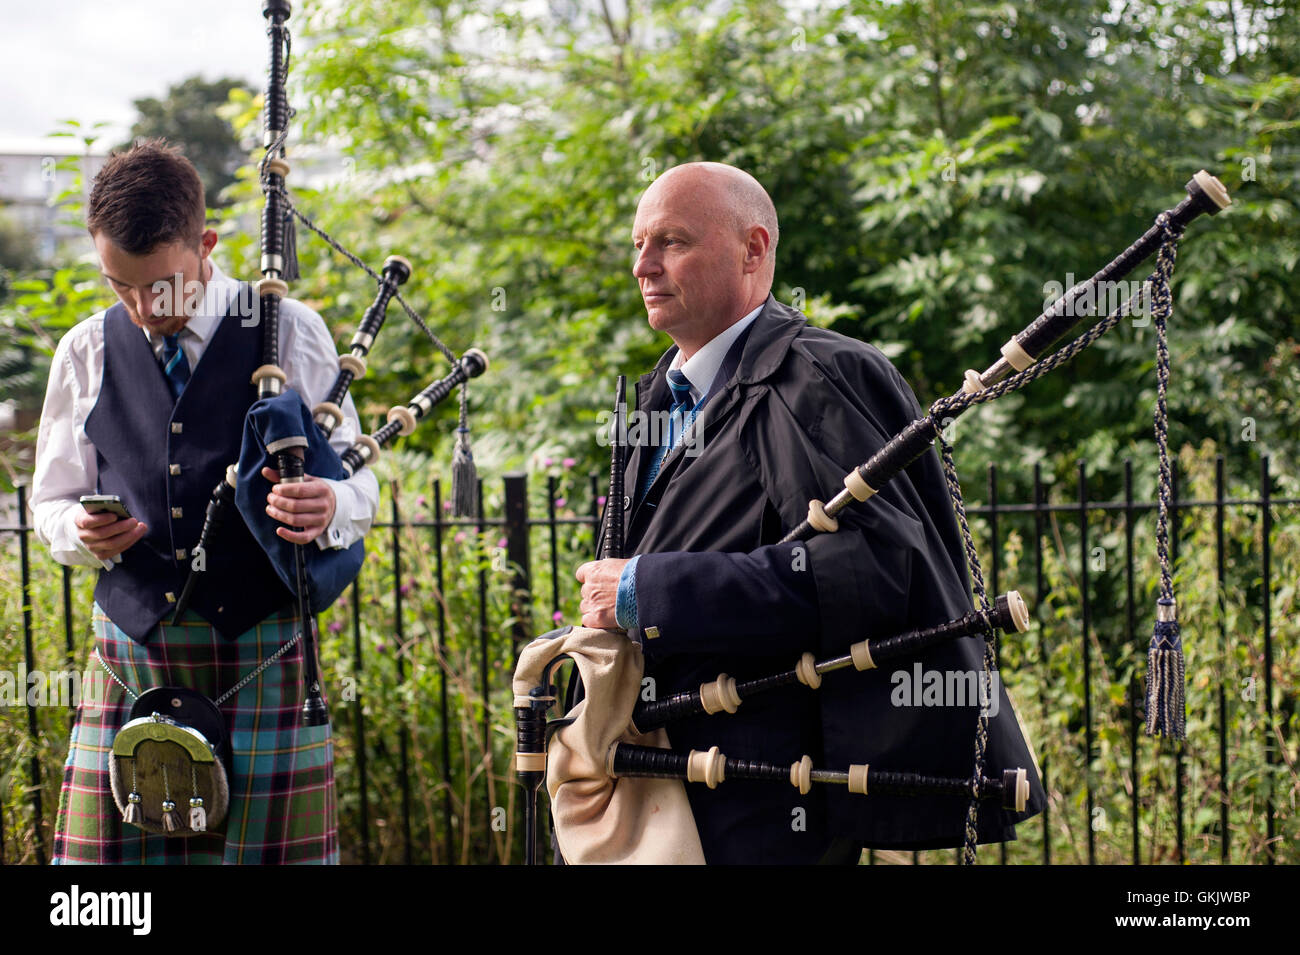 Participants take part in 2016 World Pipe Band Championships grade one qualifiers at Glasgow Green. Stock Photo